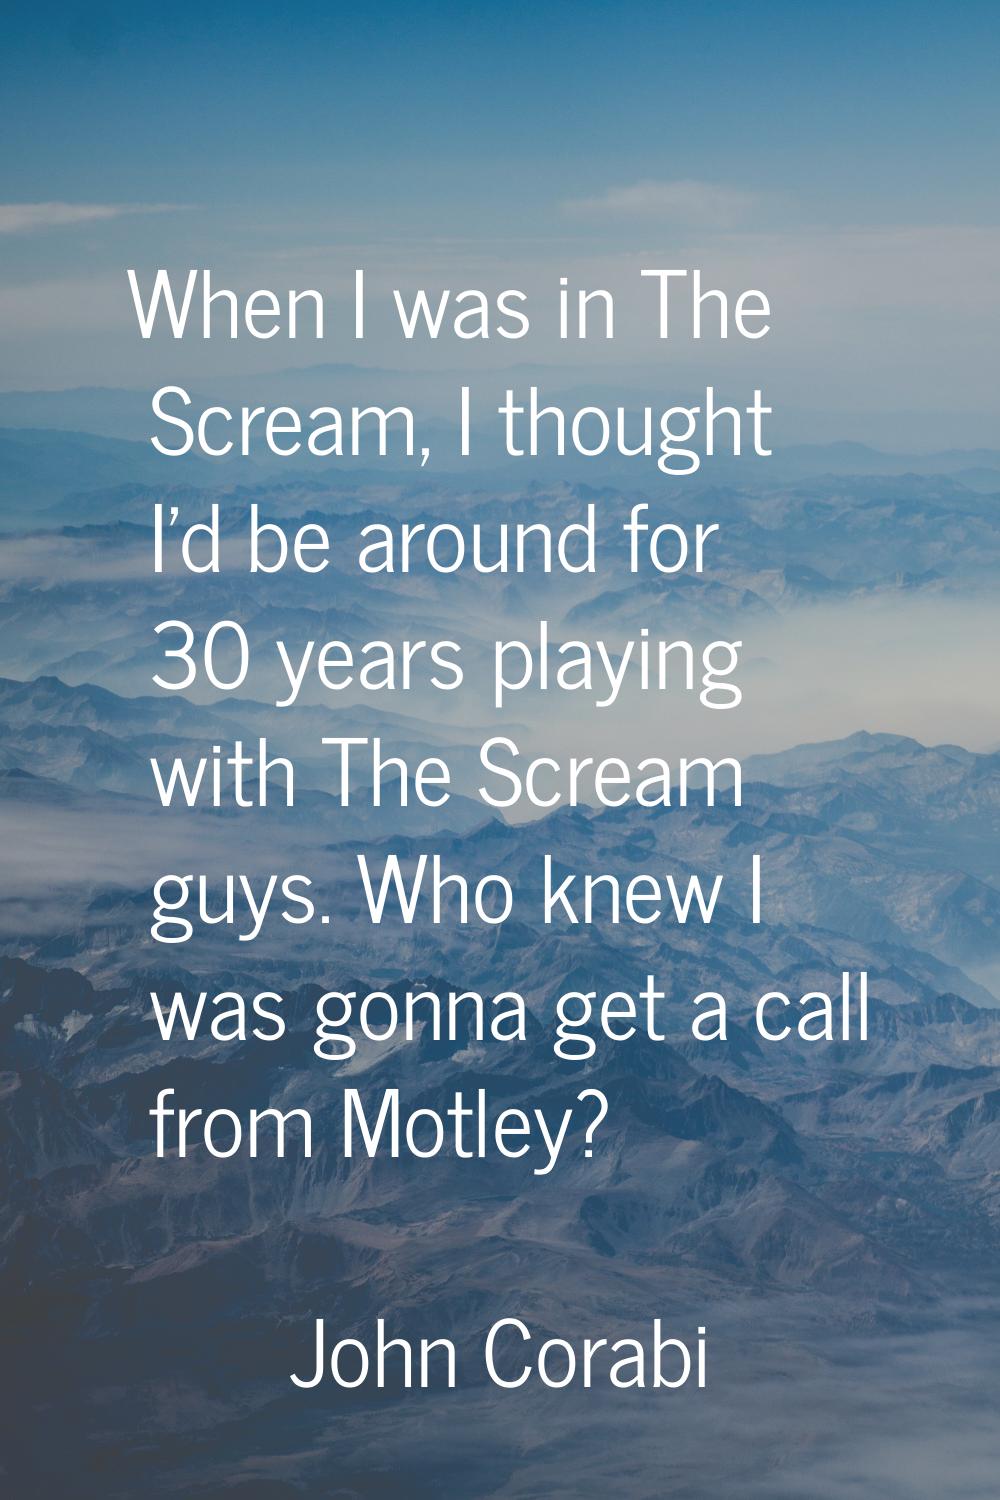 When I was in The Scream, I thought I'd be around for 30 years playing with The Scream guys. Who kn